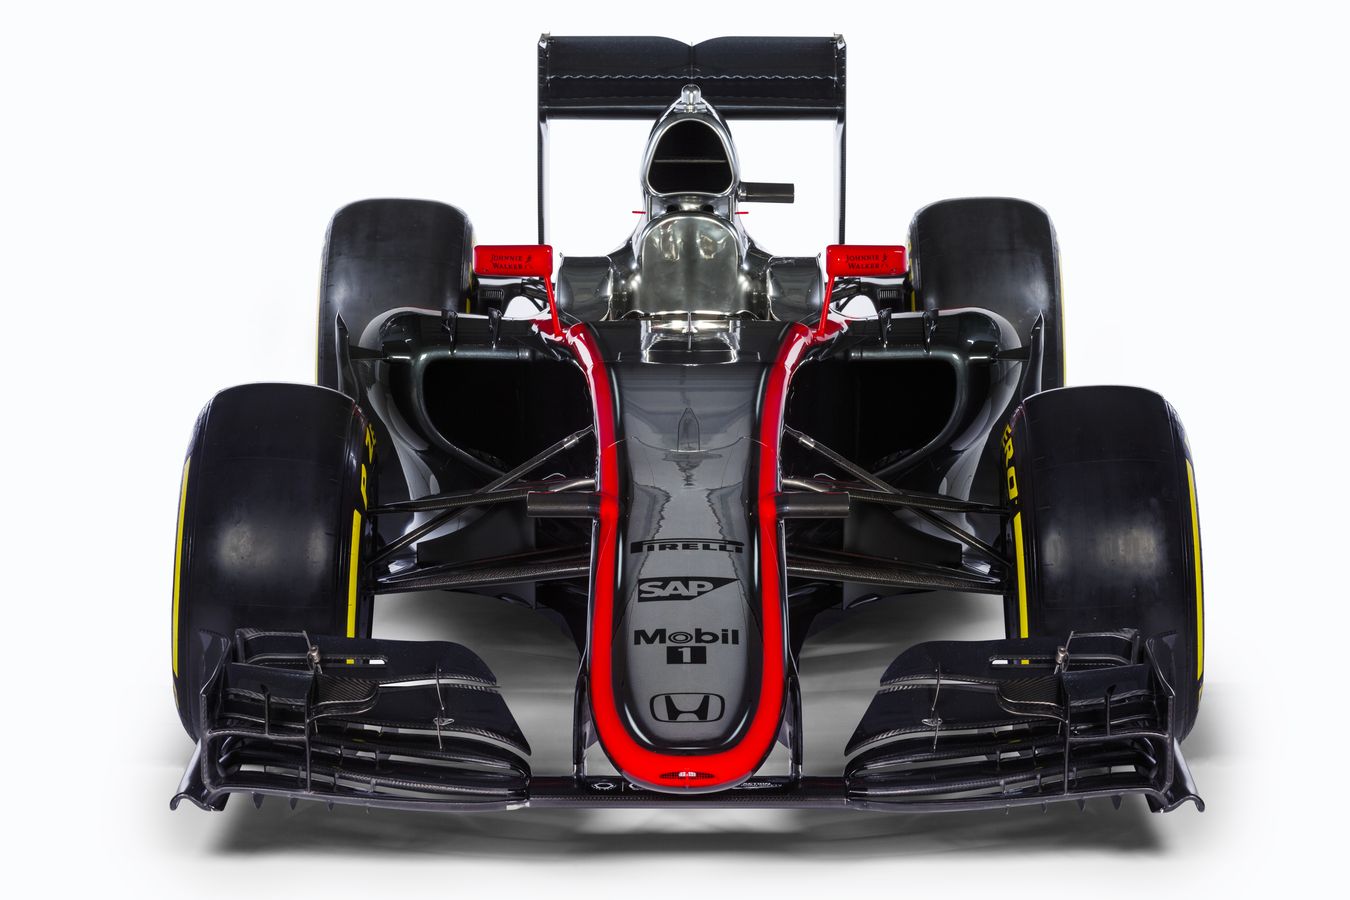 mp4-30_-_low_front_on.JPG